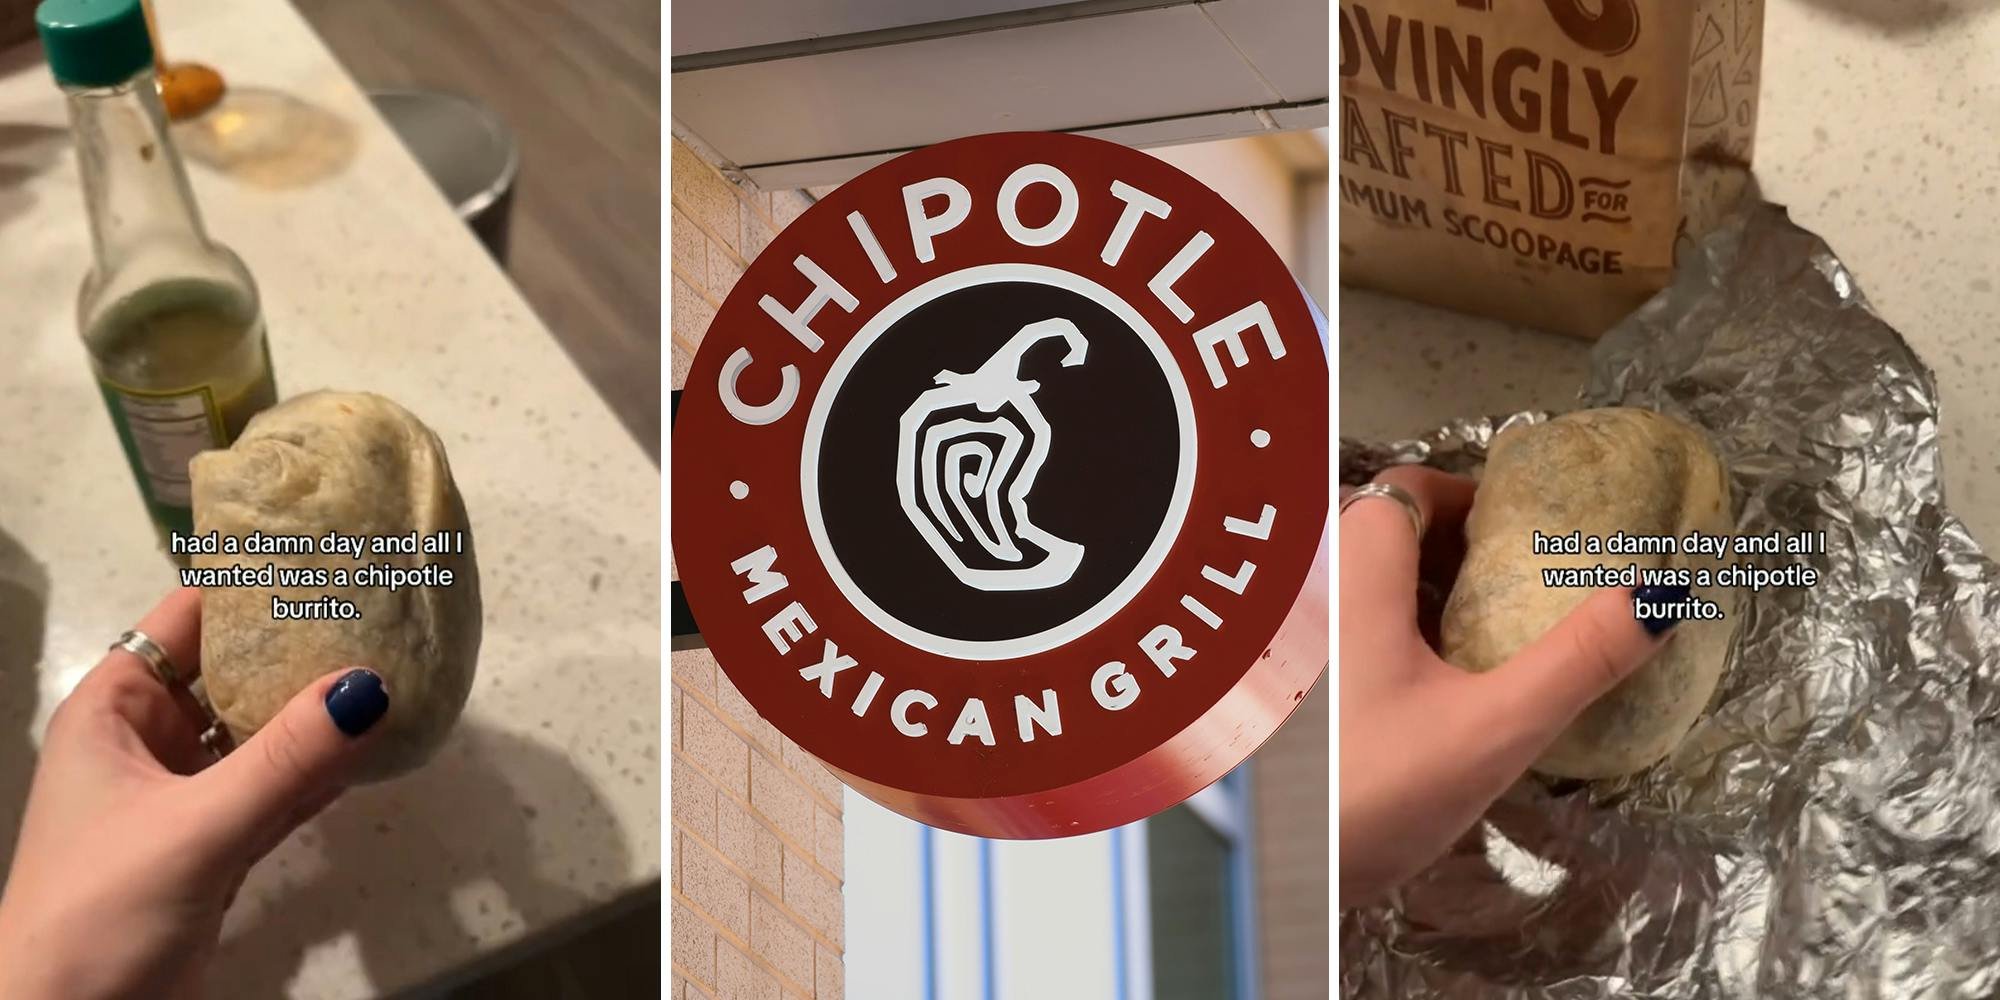 'I thought it was a potato': Customer slams Chipotle after receiving 'micro burrito'